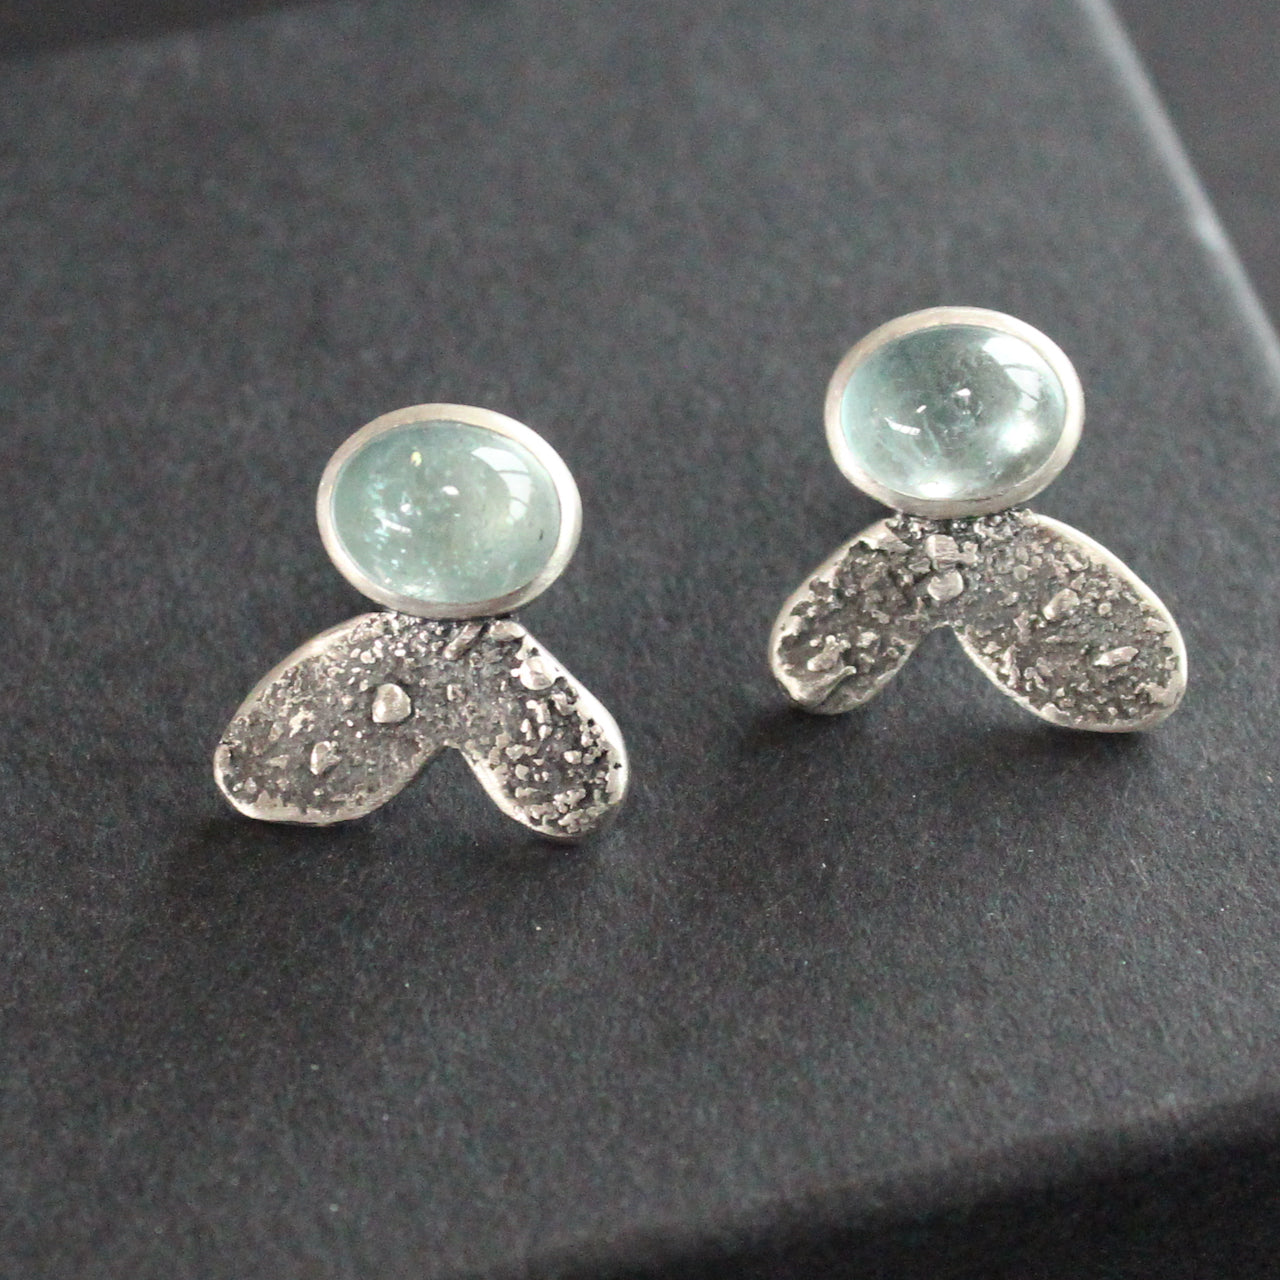 Carin Lindberg - Aquamarine studs in textured sterling silver close up